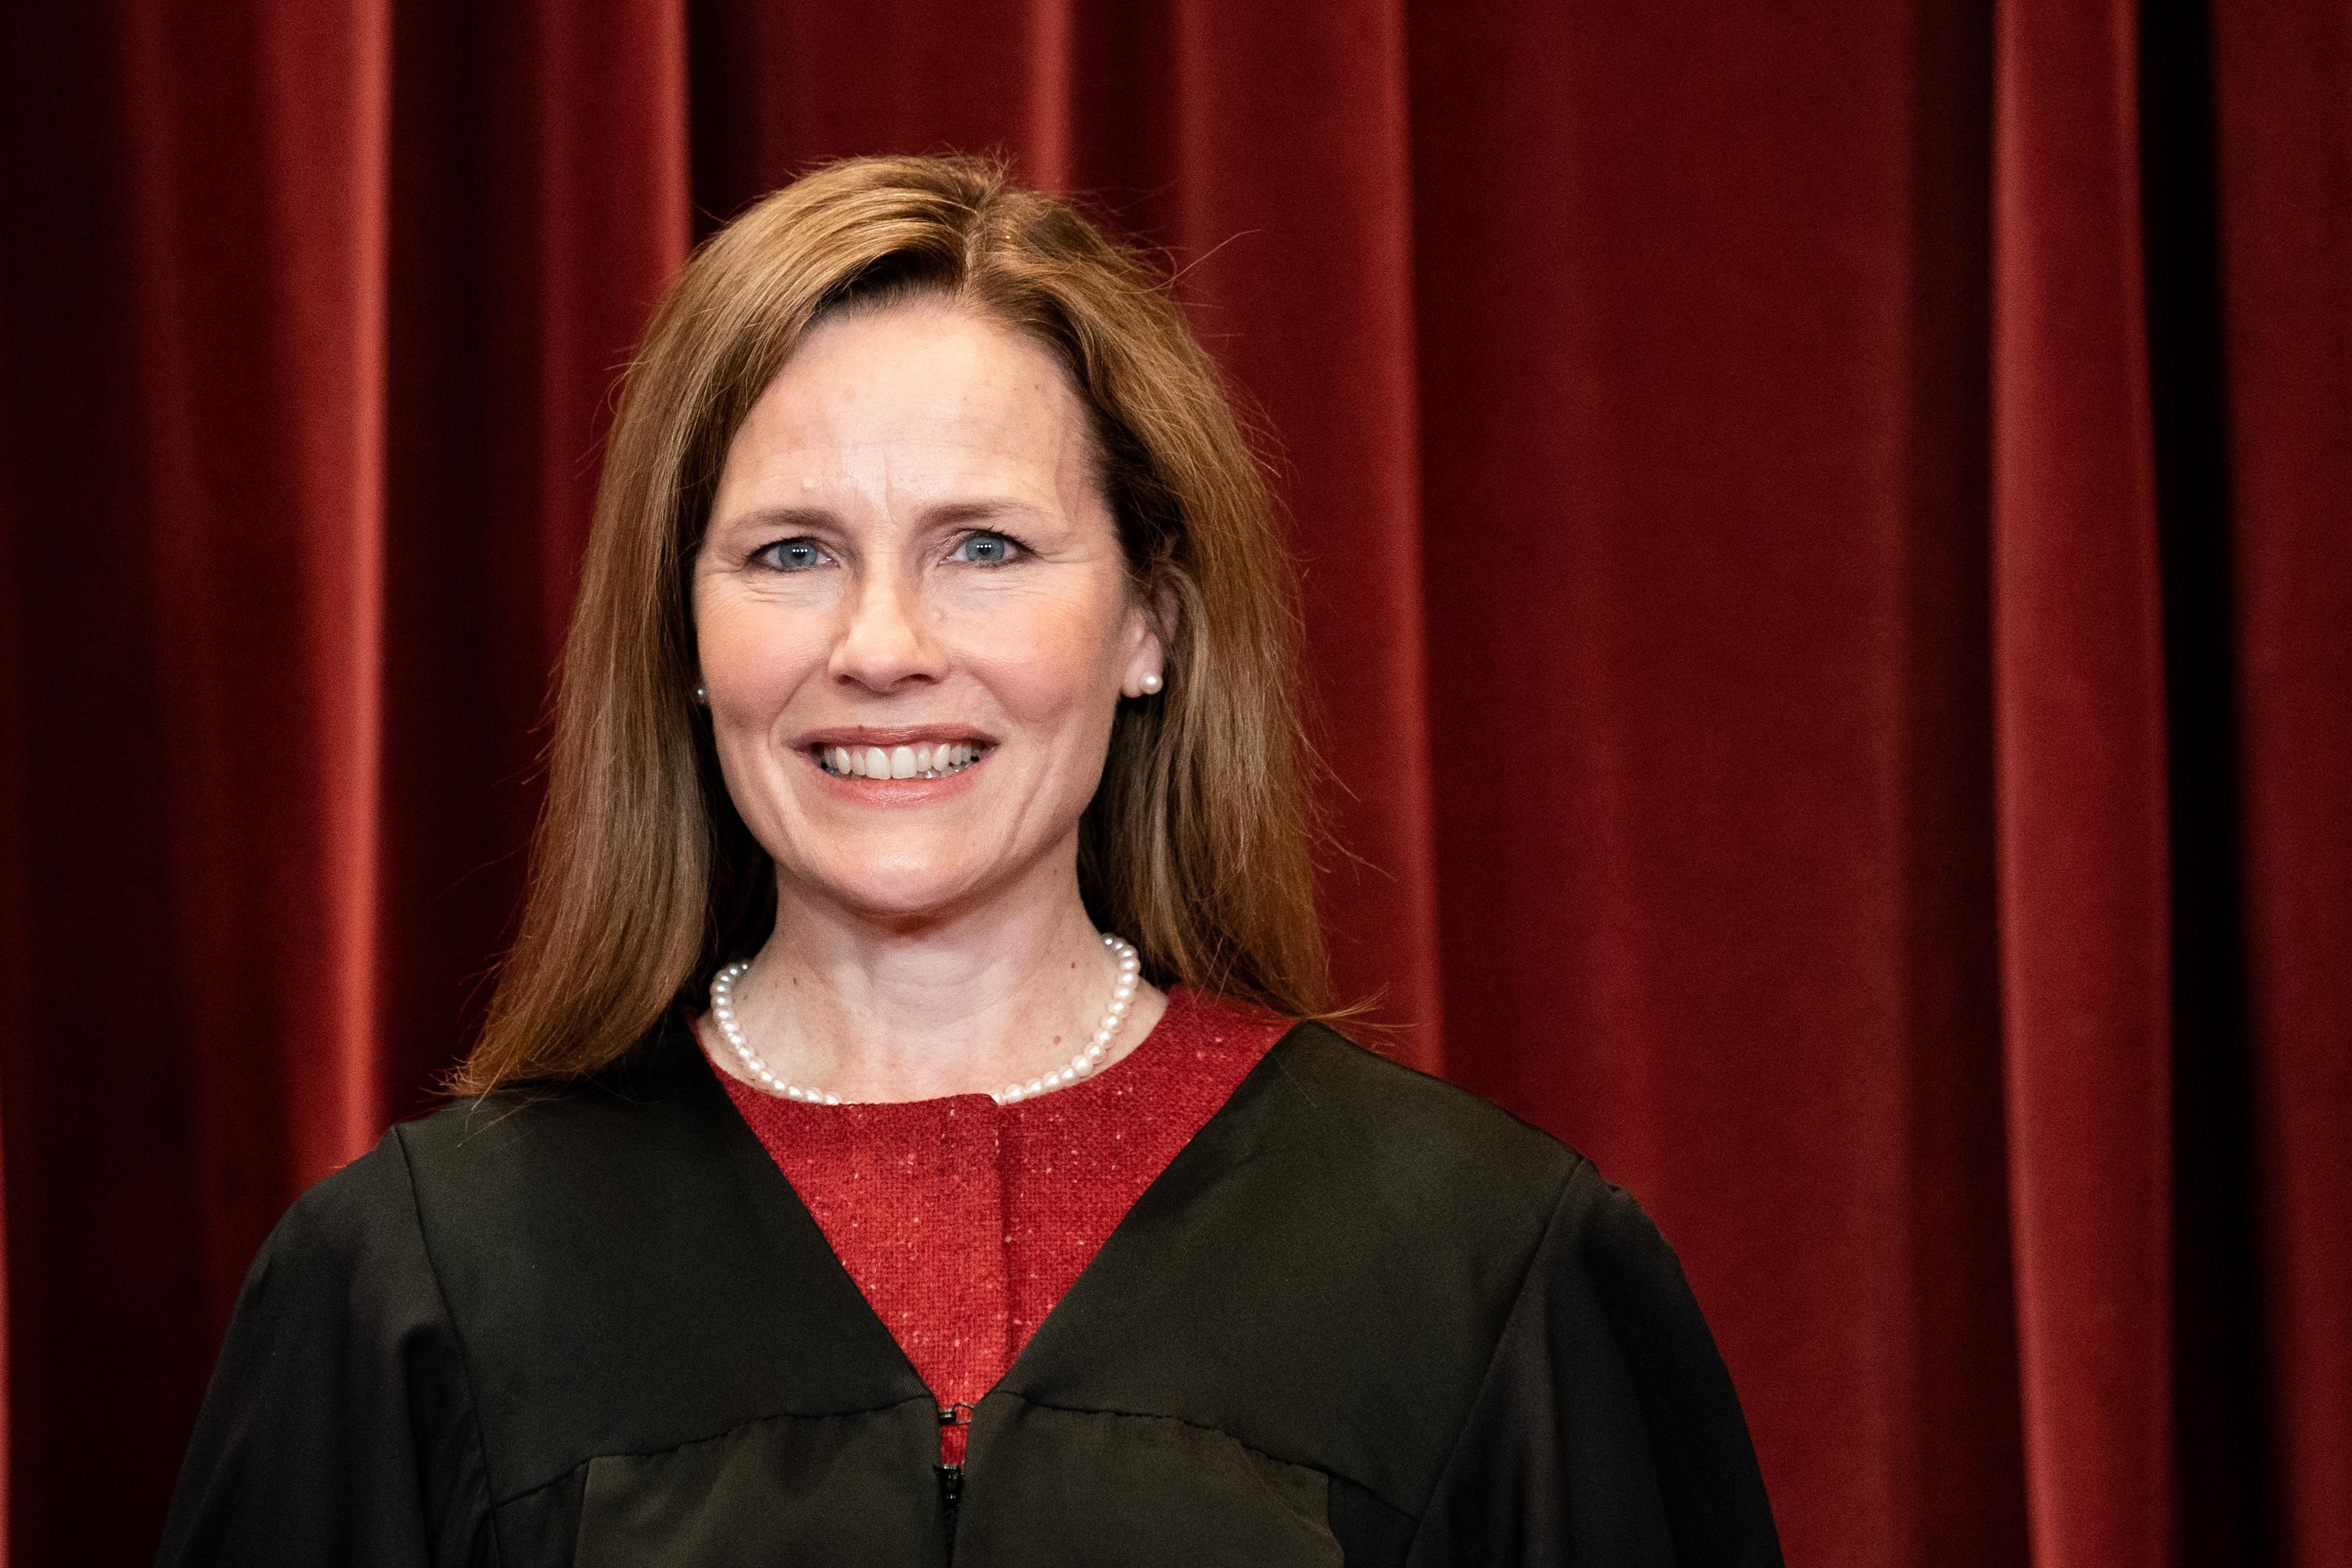 Associate Justice Amy Coney Barrett stands during a group photo of the Justices at the Supreme Court in Washington, DC on April 23, 2021.